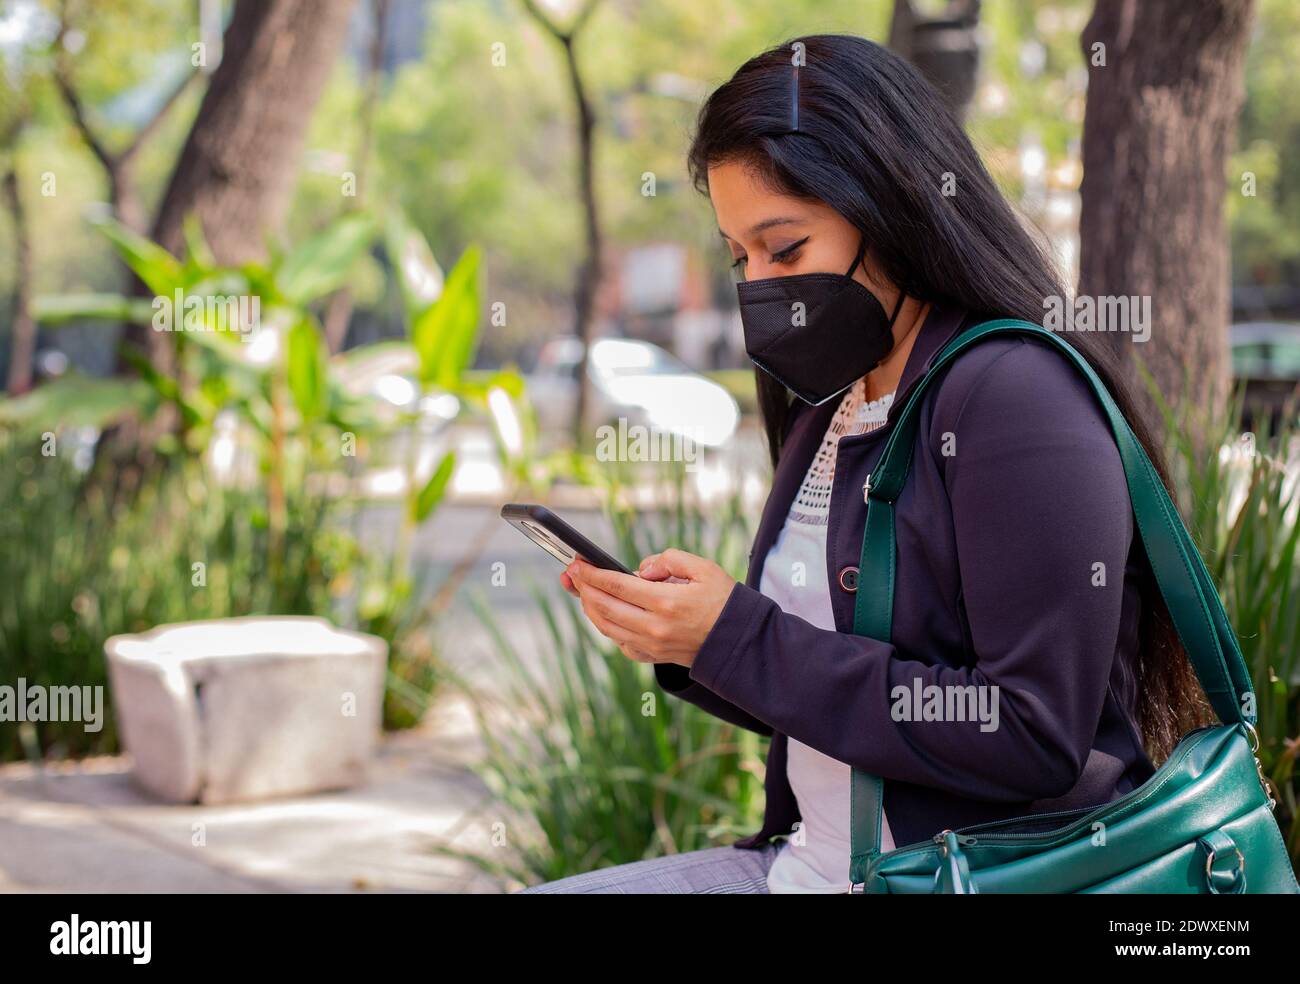 Latin businesswoman wearing a face mask for protective reasons during the covid 19 pandemic. Stock Photo